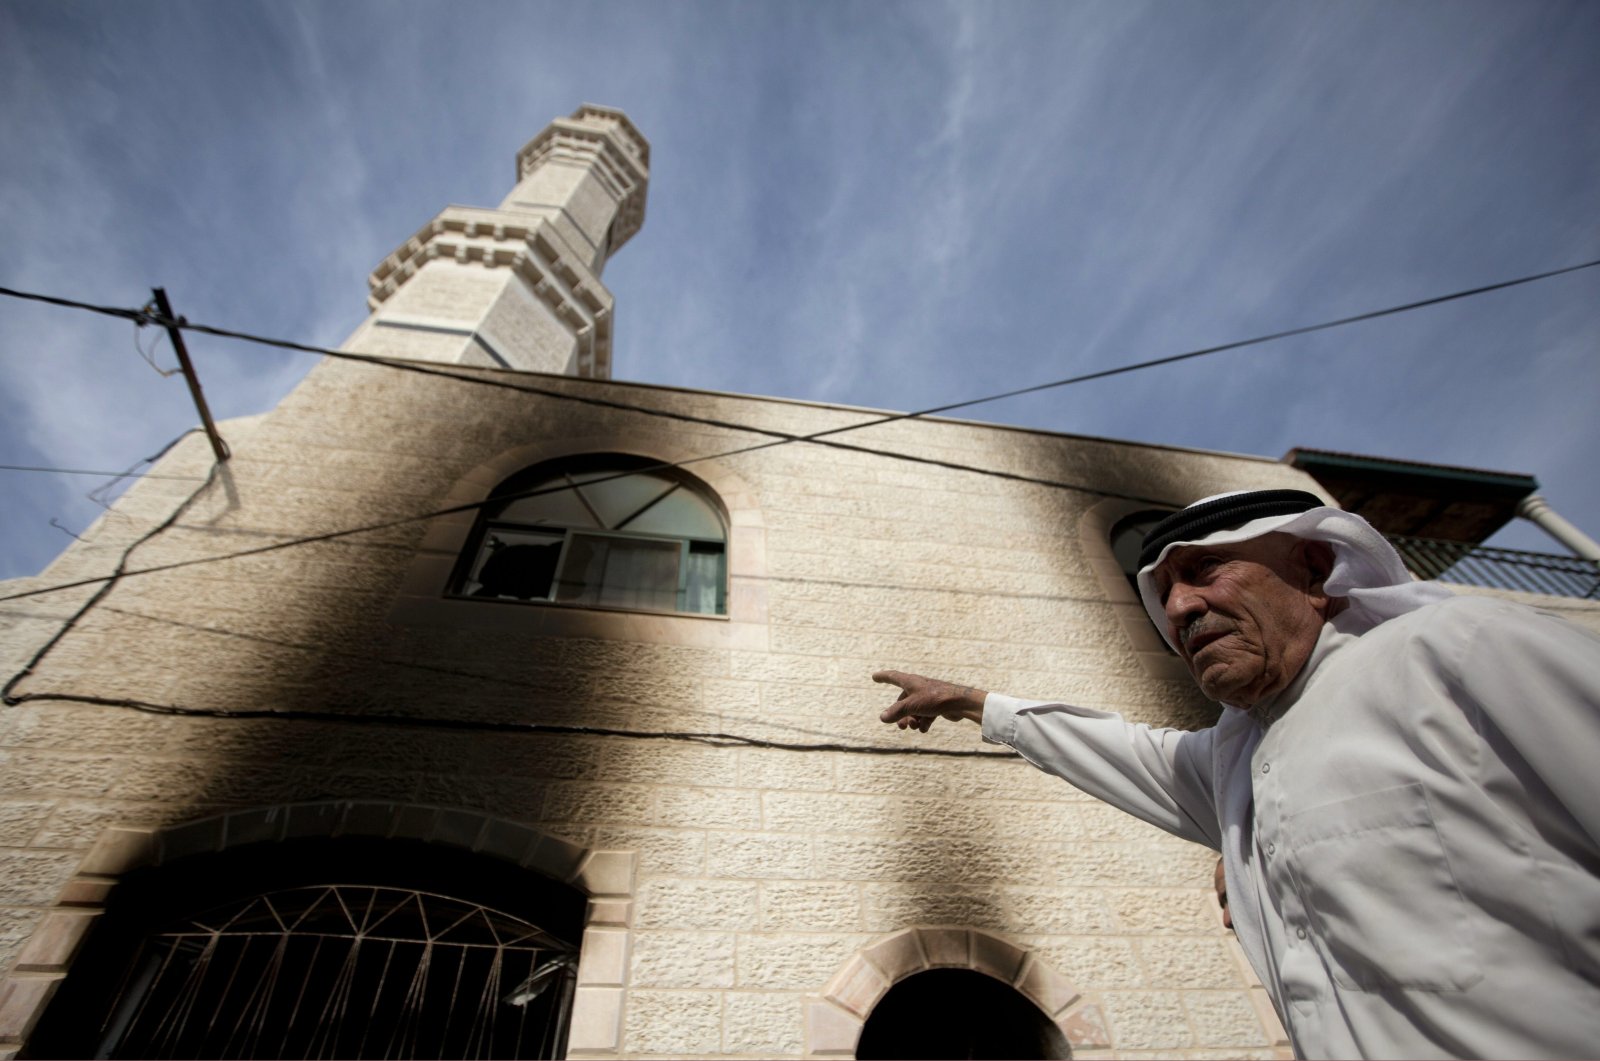 Palestinians inspects the damage on a mosque following an attack in the West Bank village of Mughayer, north of Ramallah, West Bank, occupied Palestine, Nov. 12, 2014. (AP Photo)